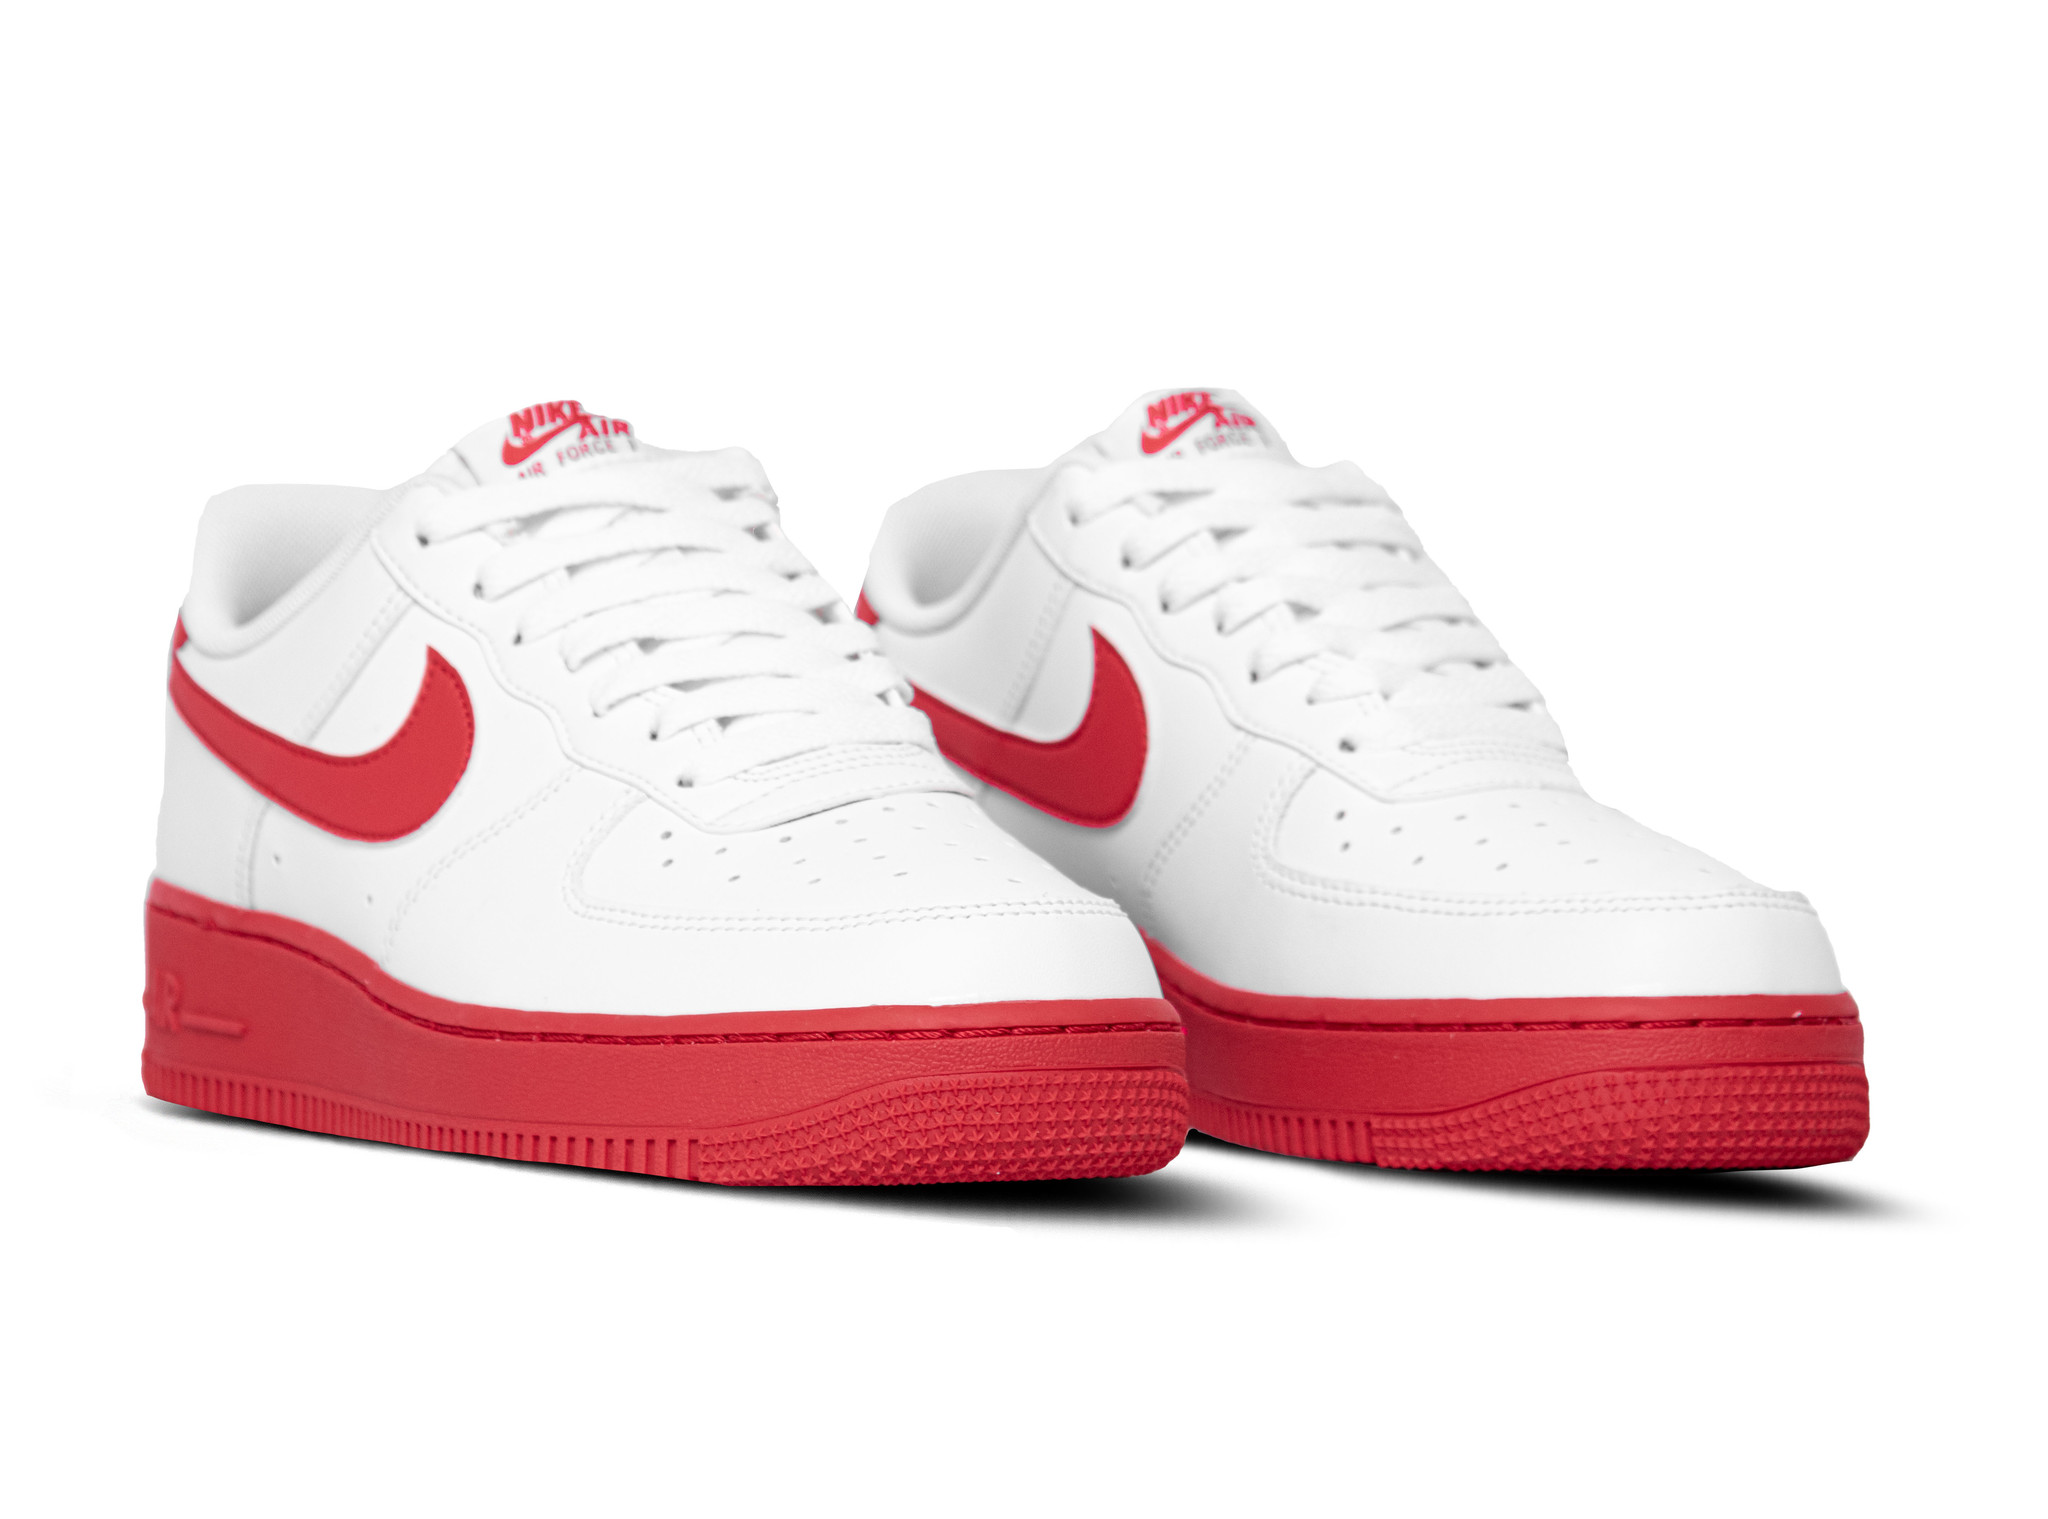 university red and white air force 1